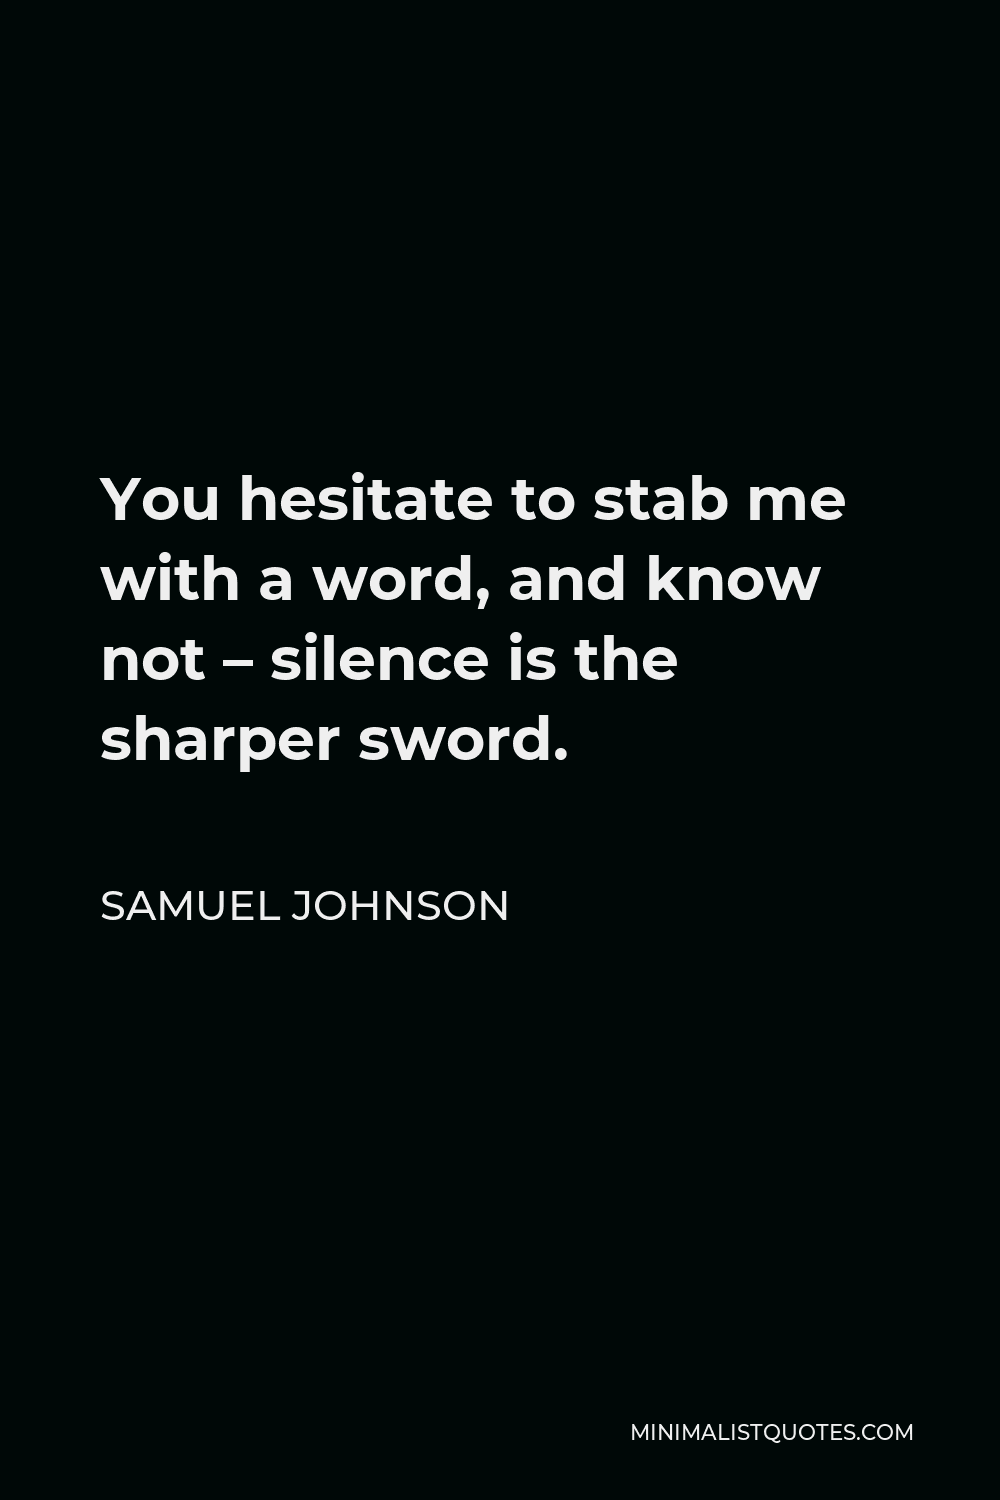 Samuel Johnson Quote - You hesitate to stab me with a word, and know not – silence is the sharper sword.